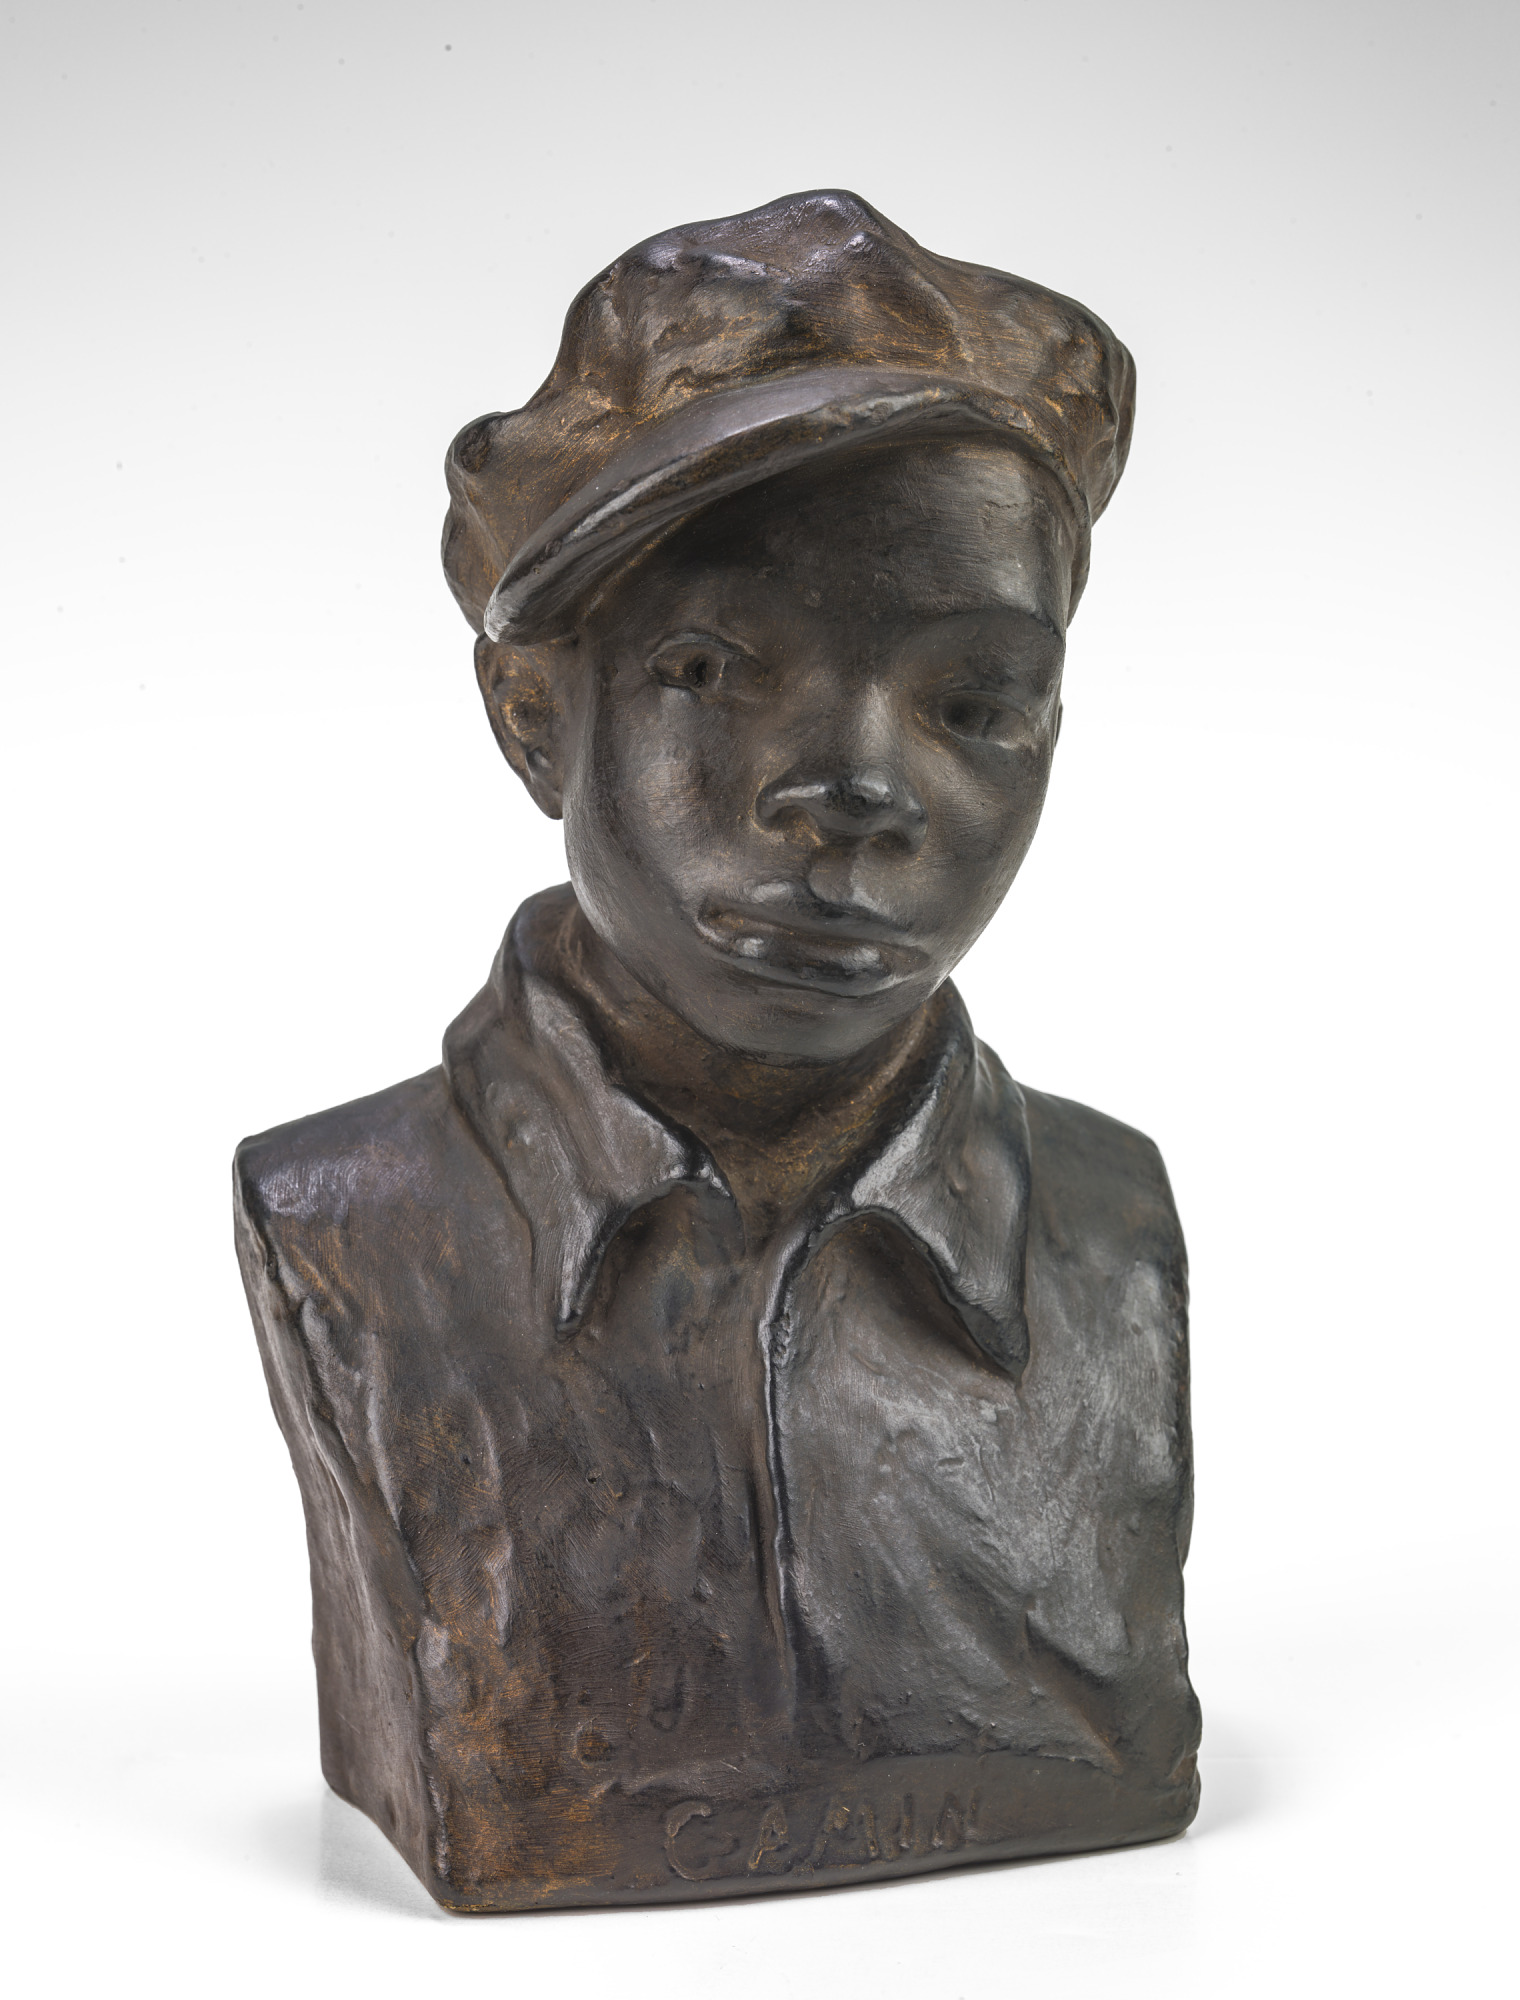 A bronze statue of a young boy with a hat on his head and a zipped up jacket